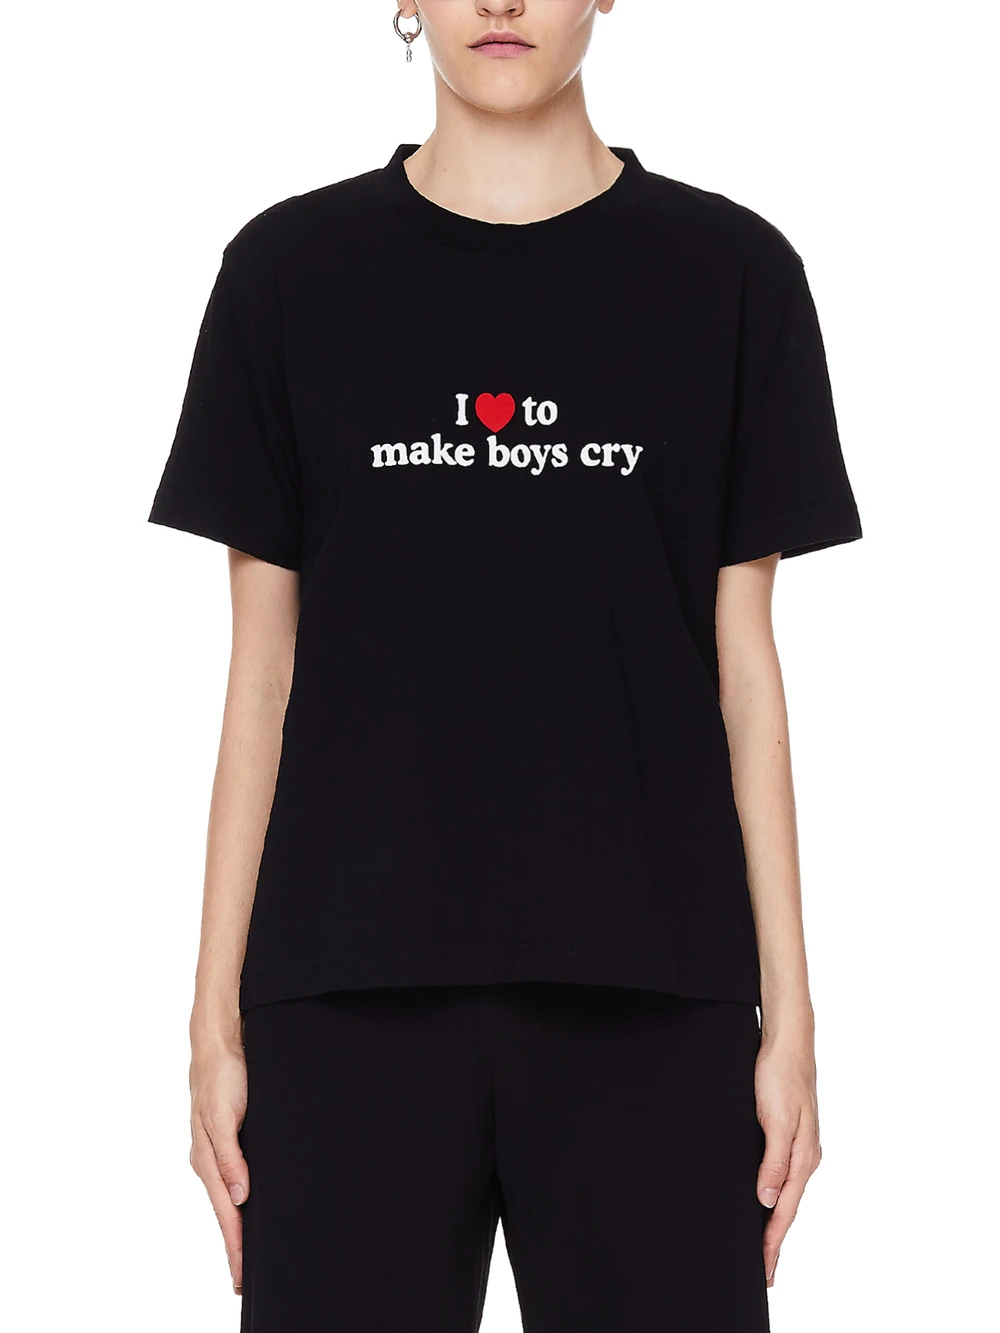 

Make Boys Cry T-Shirt In Black Girl's Classic Boutique 100% Cotton Printed Shirt Hot New Summer Short Sleeved Drop Sleeve Tees